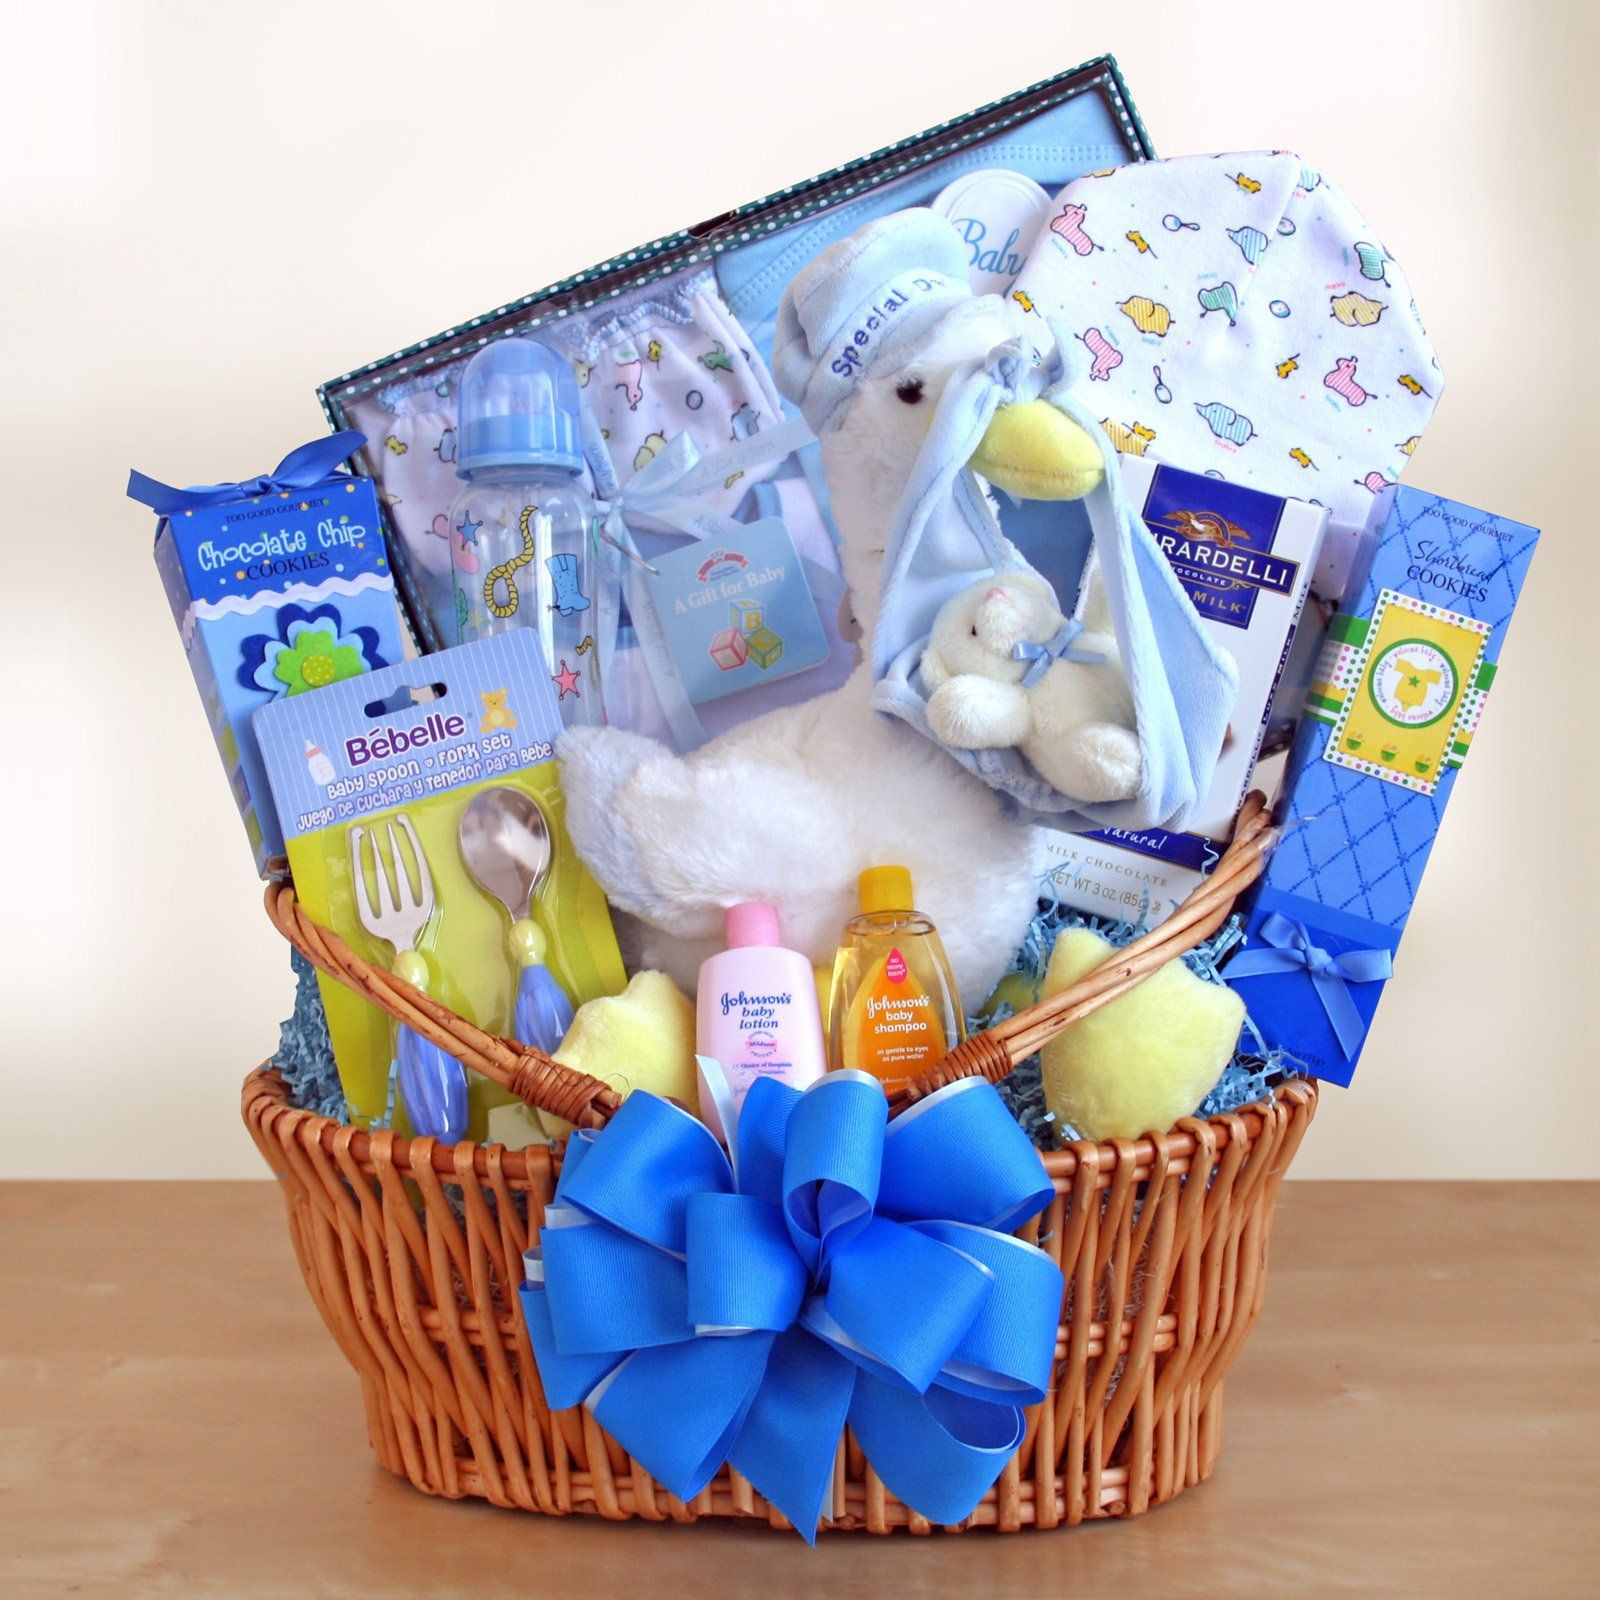 Baby Shower Gift Ideas For A Boy
 Special Stork Delivery Baby Boy Gift Basket